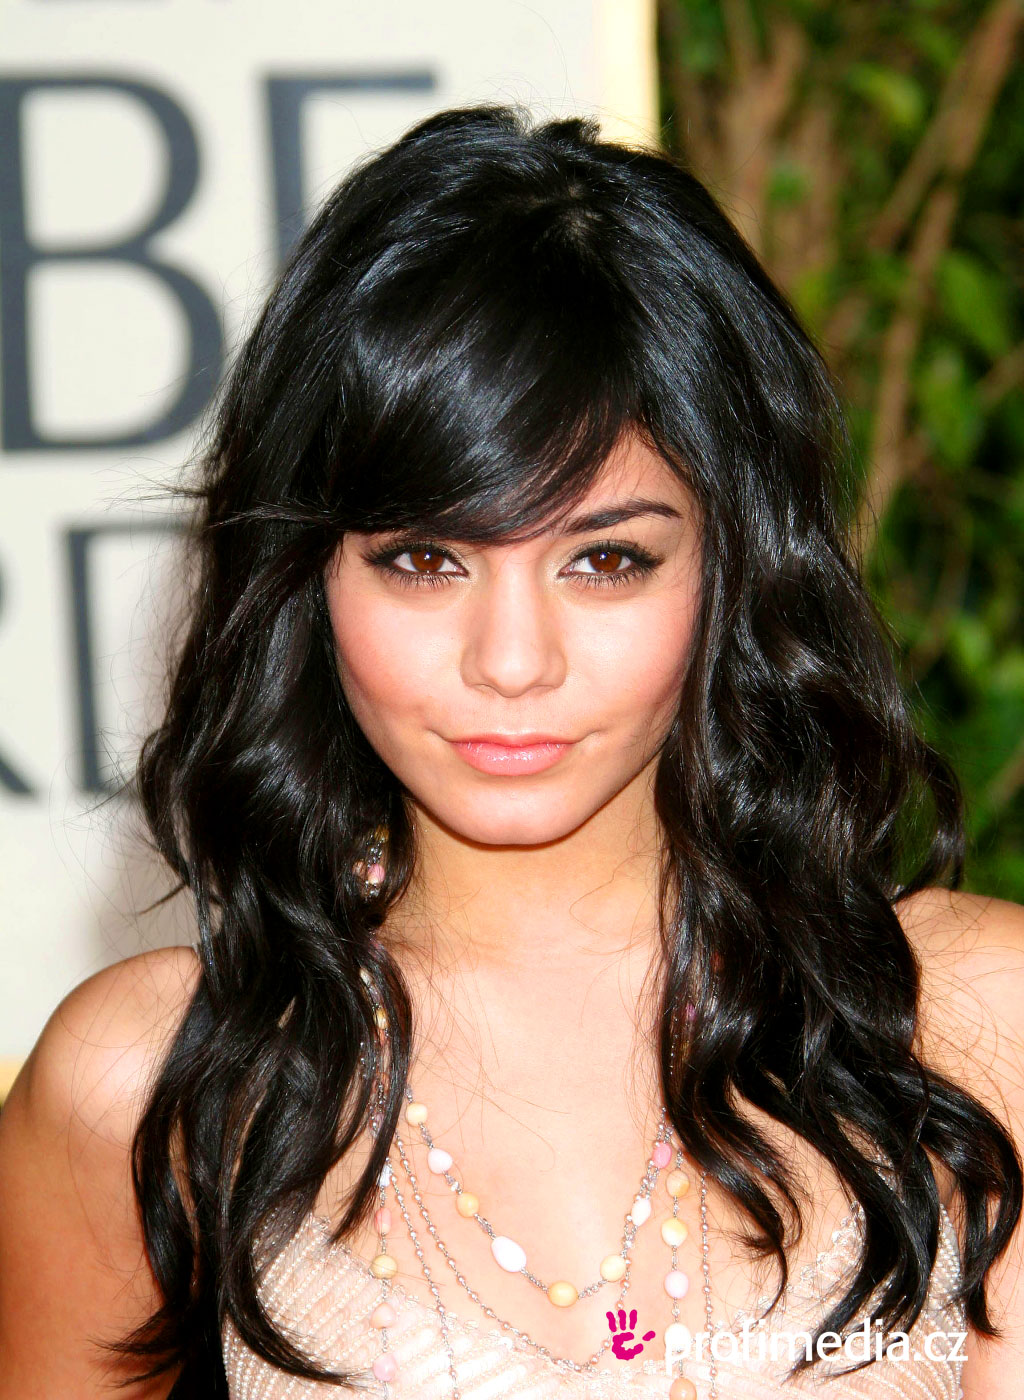 Cute Medium Layered Haircuts 2012 Celebrity Vanessa Hudgens Messy Curly Hairstyle Pictures